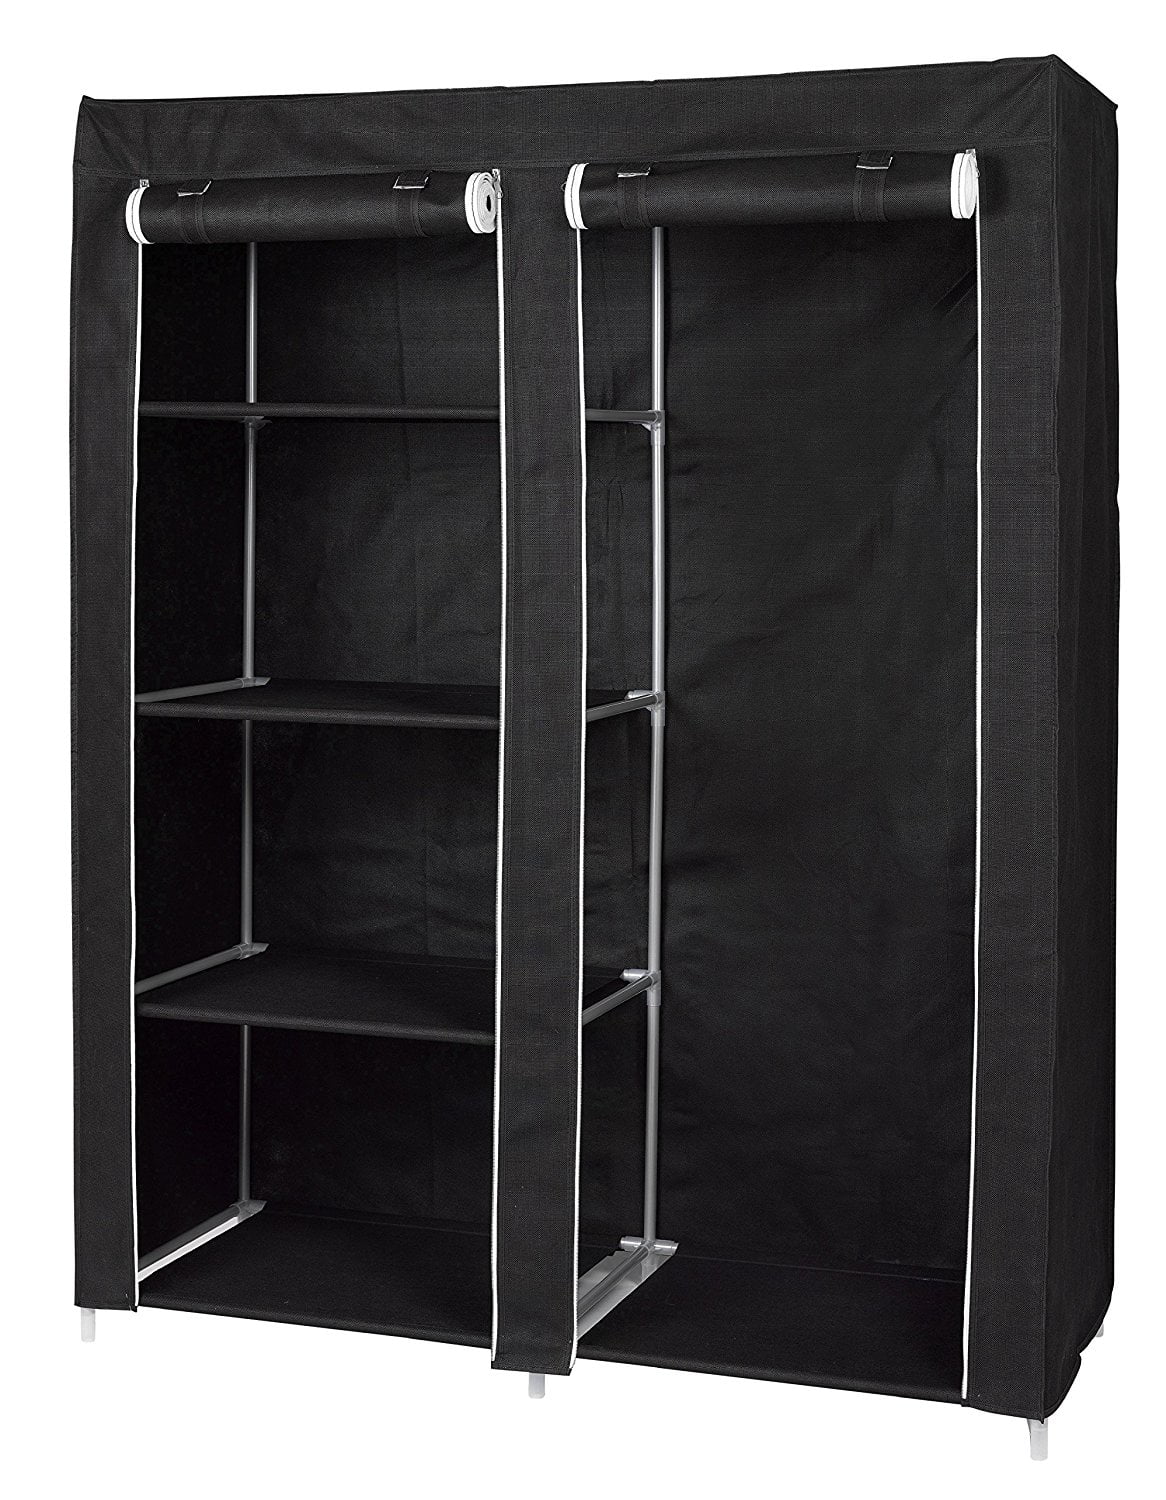 Florida Brands Portable Wardrobe Closet with 4 Shelves and Hanging ...